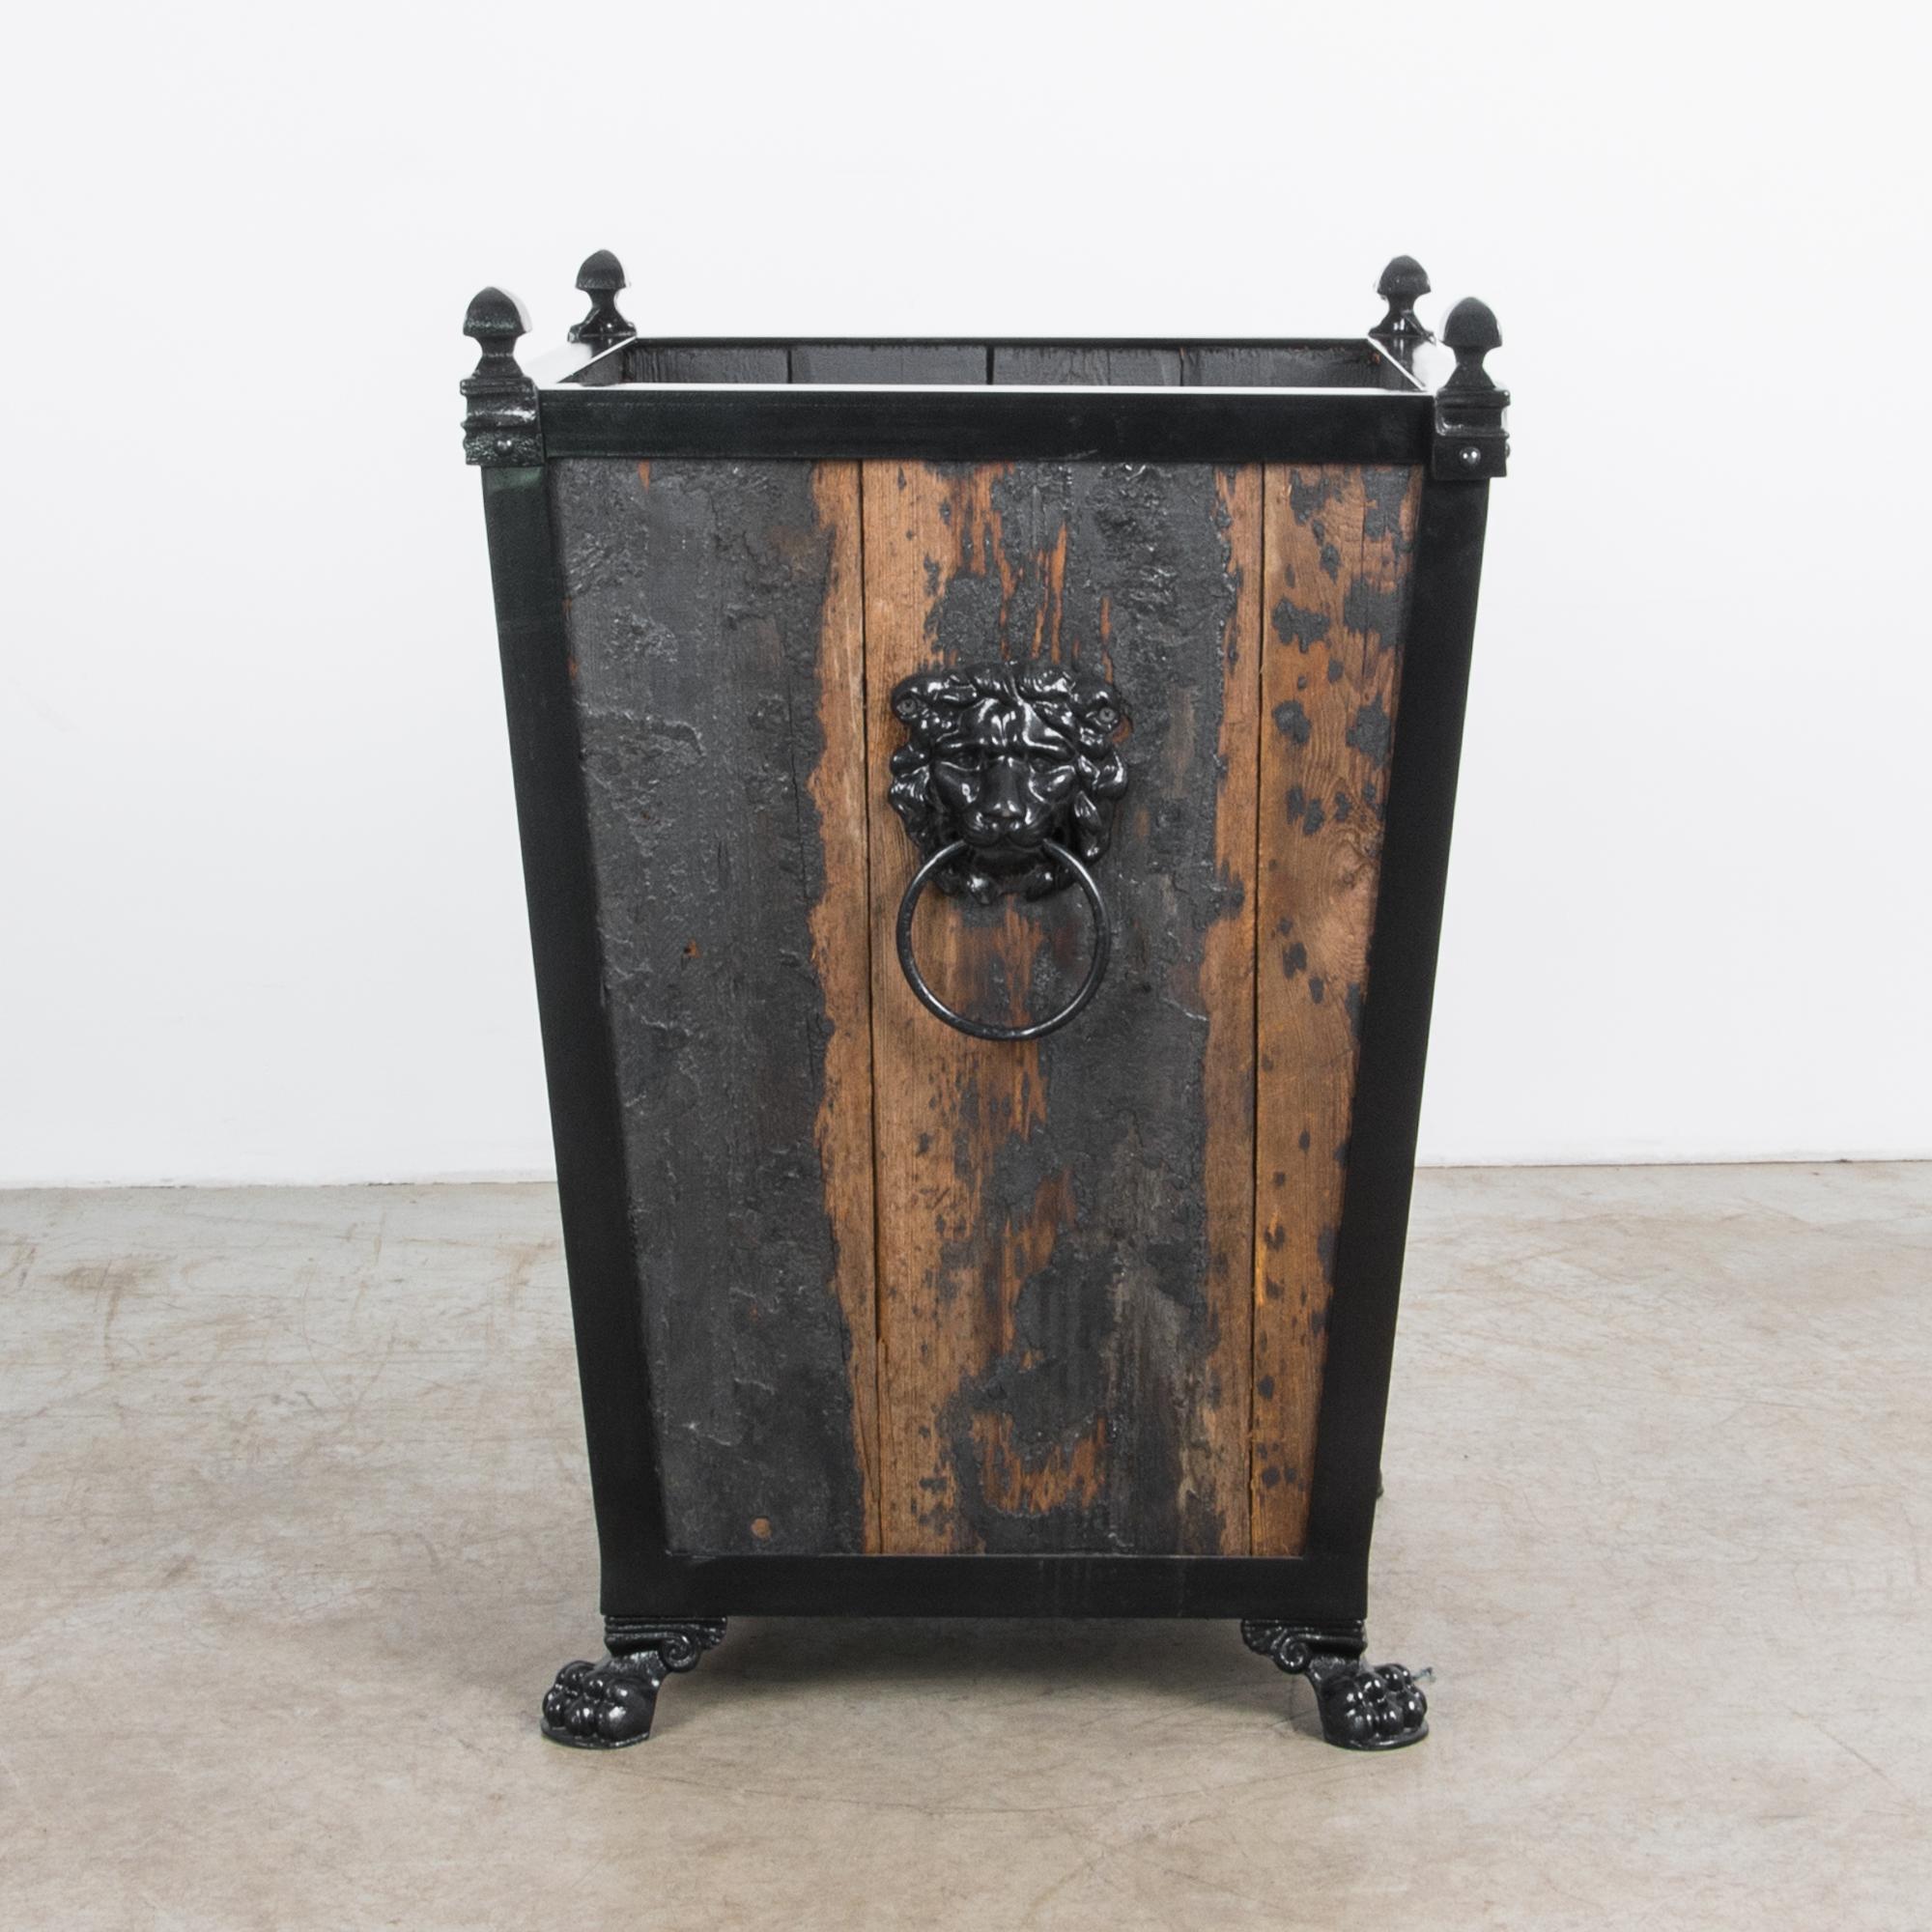 A sturdy wooden garden planter produced in our atelier. Finished with dramatic black tar, this wooden planter combines aged pine and sleek painted metal for a lightly atmospheric texture. The textured finish compliments a classic combination of